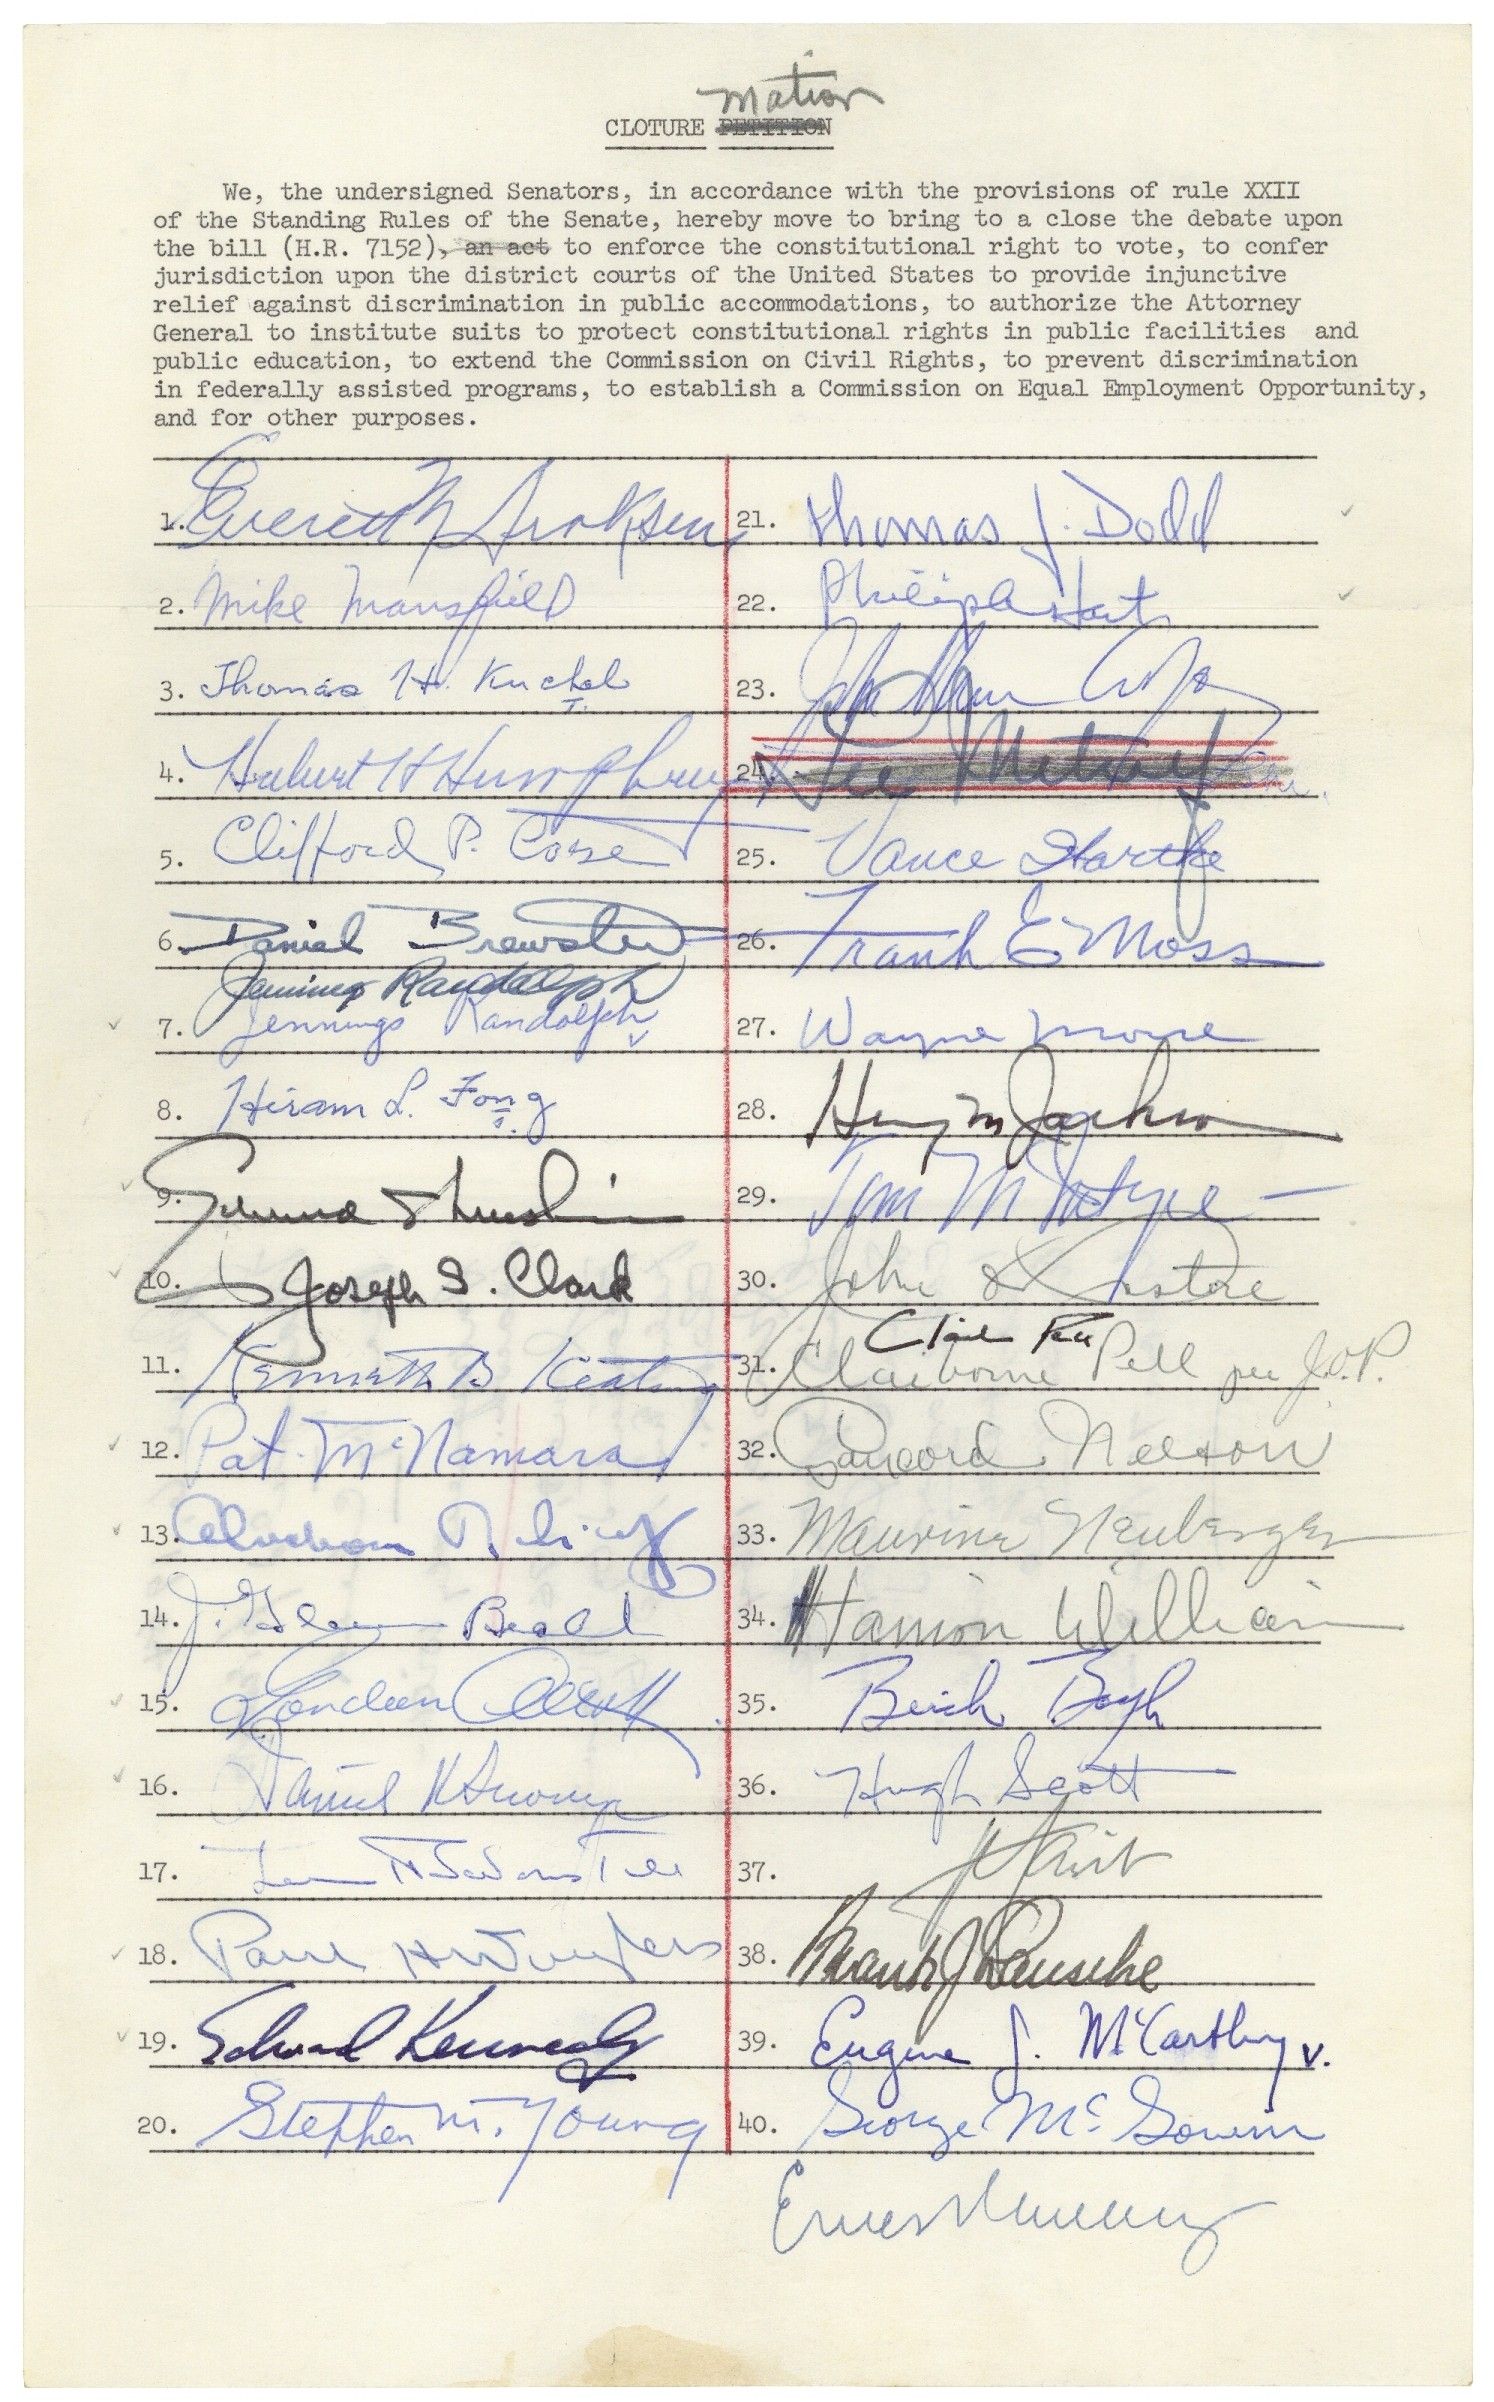 Signature Page of the Civil Rights Act of 1964. List of Senator's Signature.